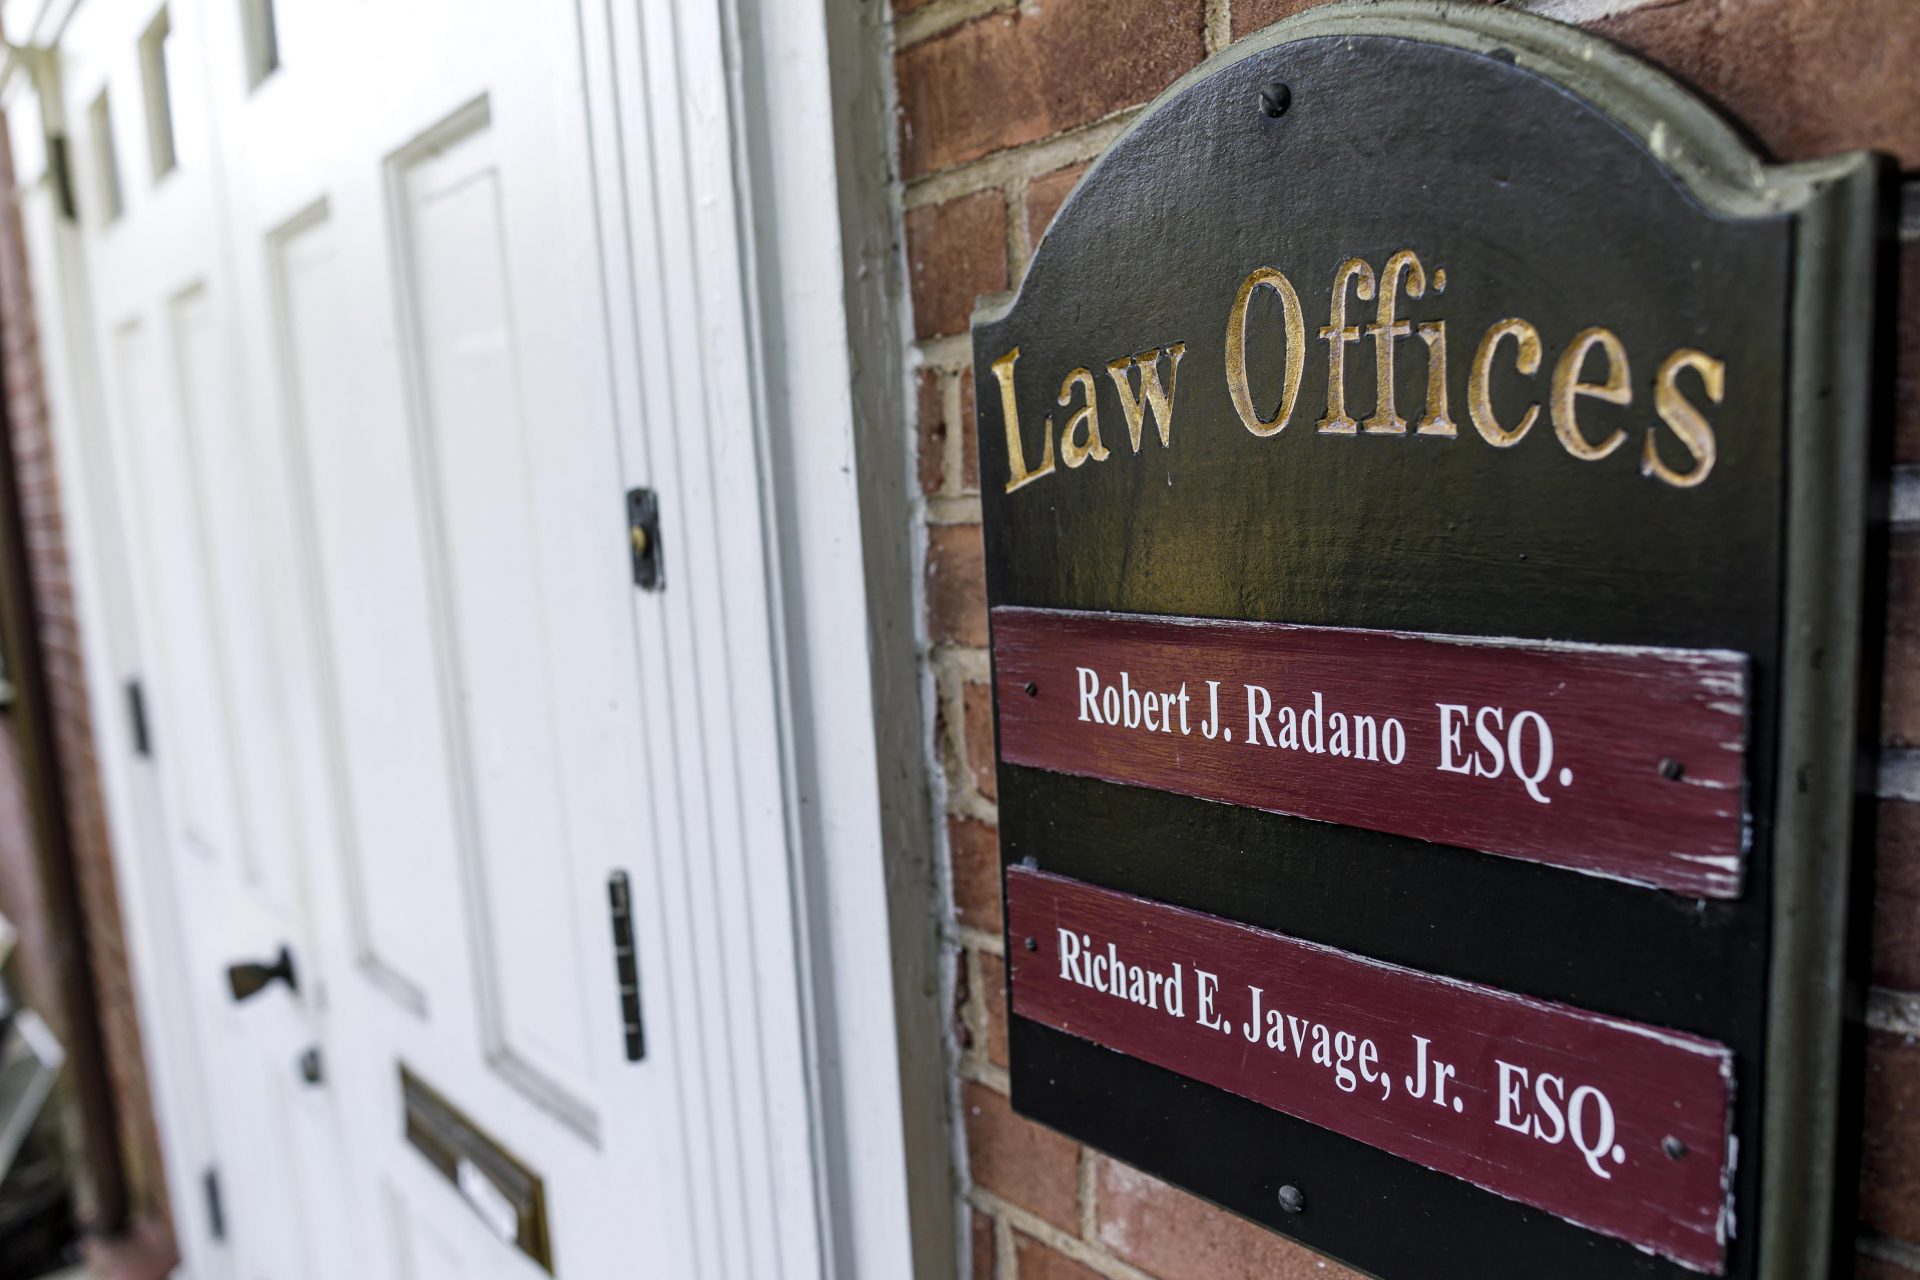 The law offices of Robert J. Radano, a district judge who had the equivalent of five months without court appearances in 2019 despite receiving good benefits paid by taxpayers.